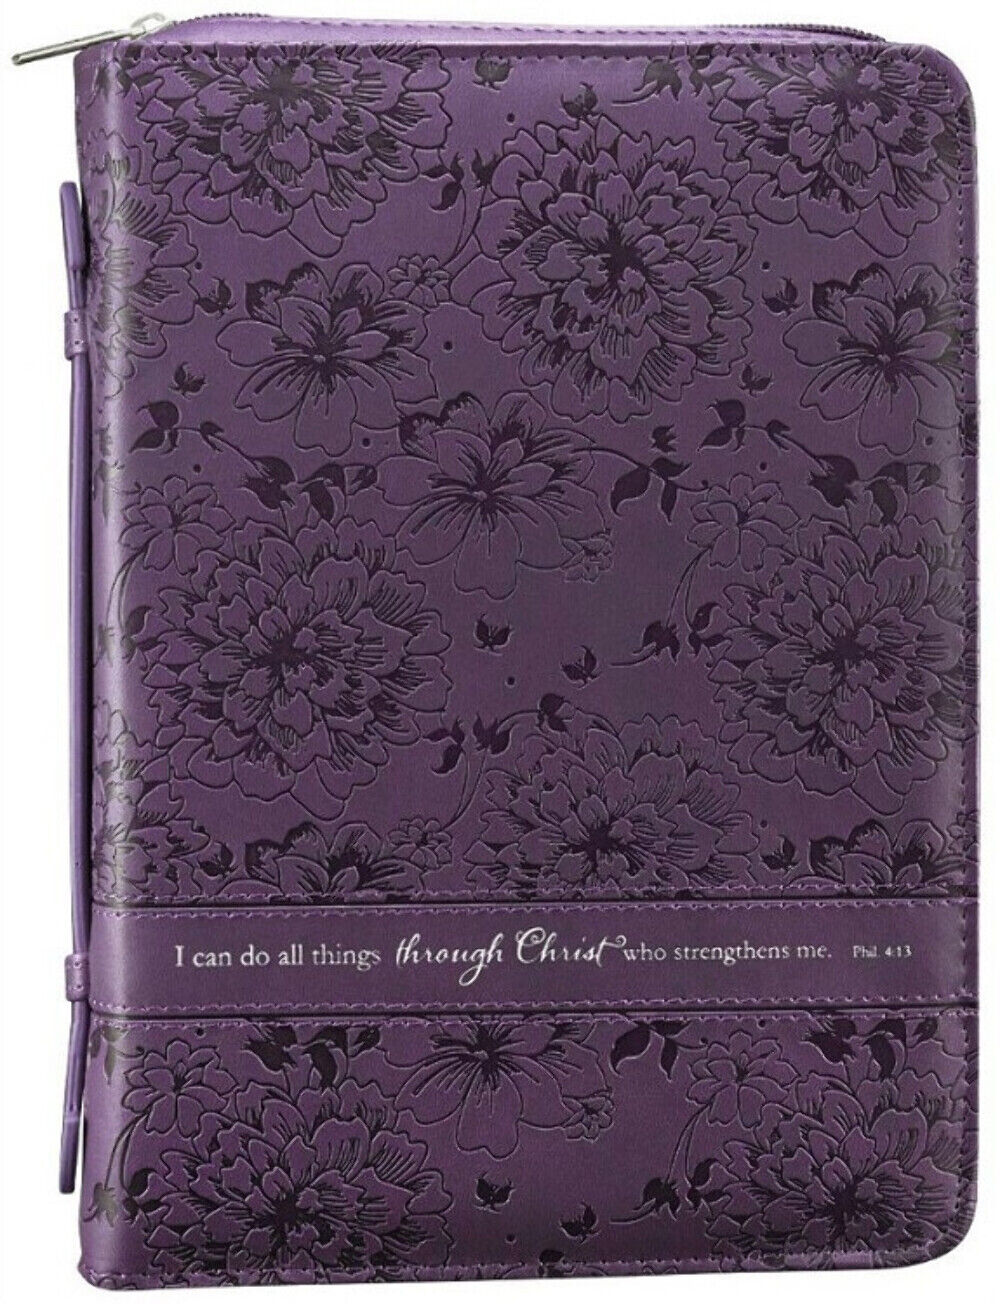 Bible Cover Medium Size, Purple Floral LuxLeather, I can do all things through C